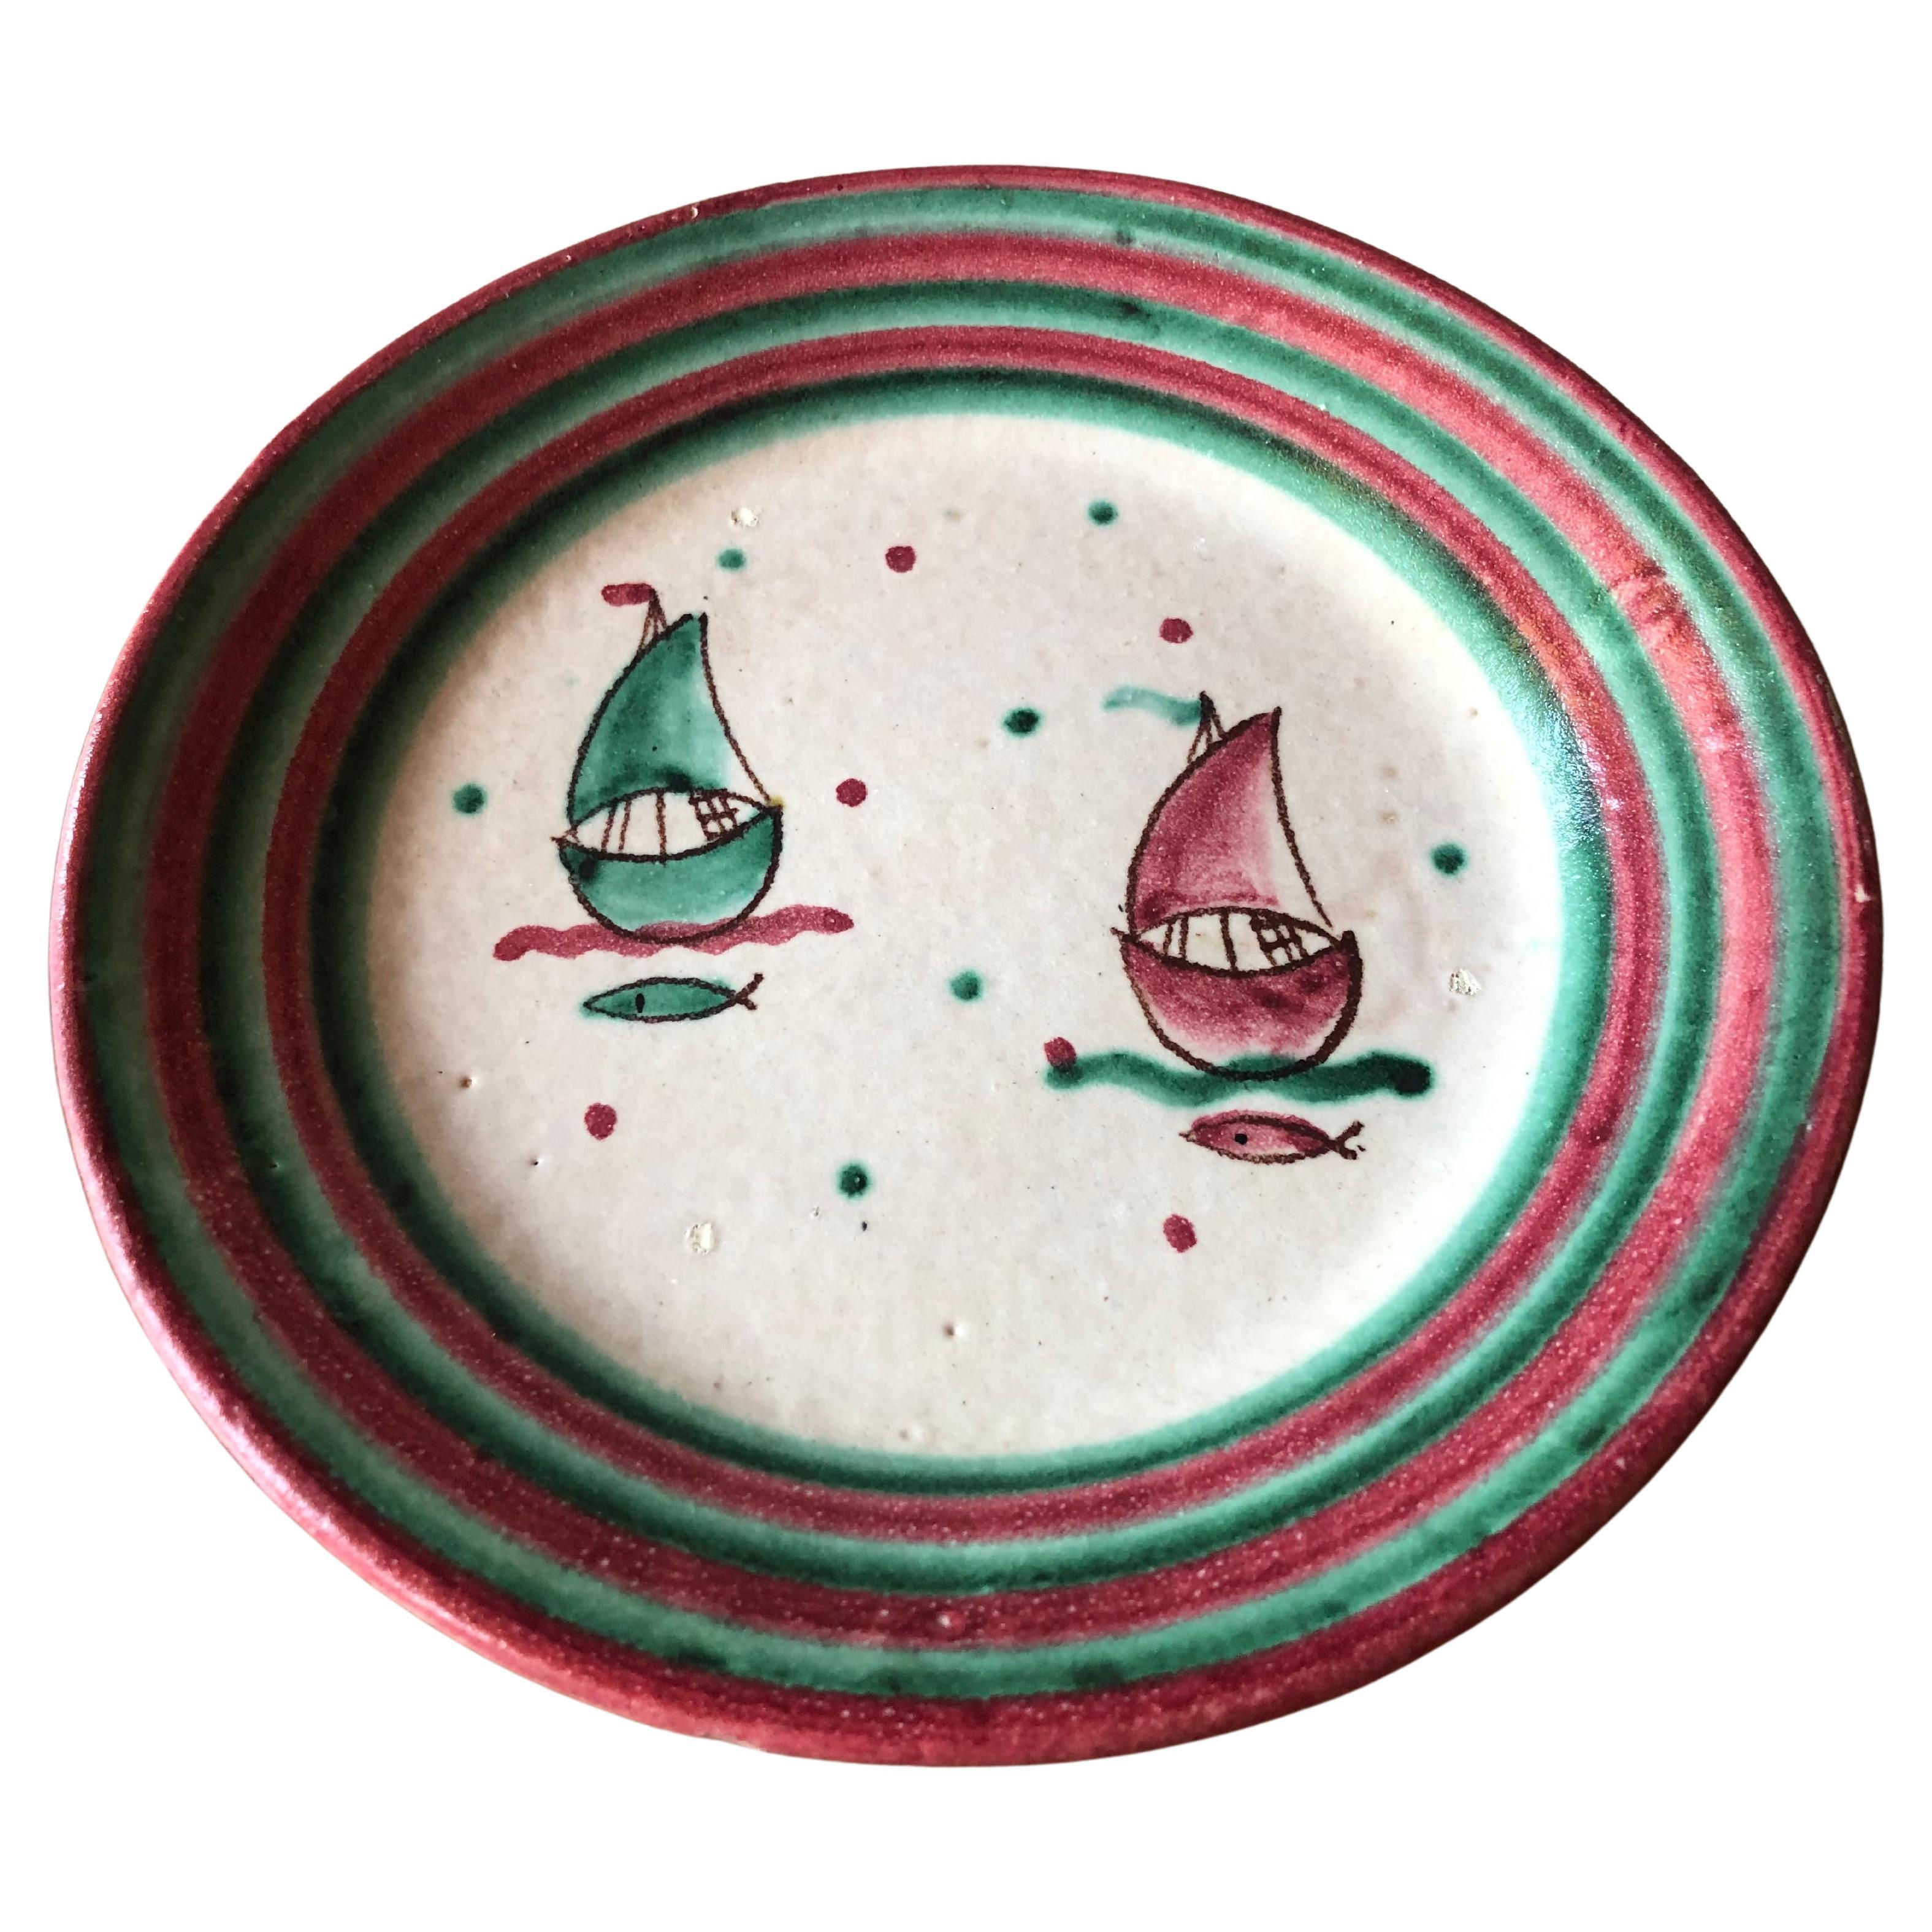 Mid century Italian stoneware centrepiece plate hand painted in shades of green and pink, with sailboats and fish swimming in the sea. 
